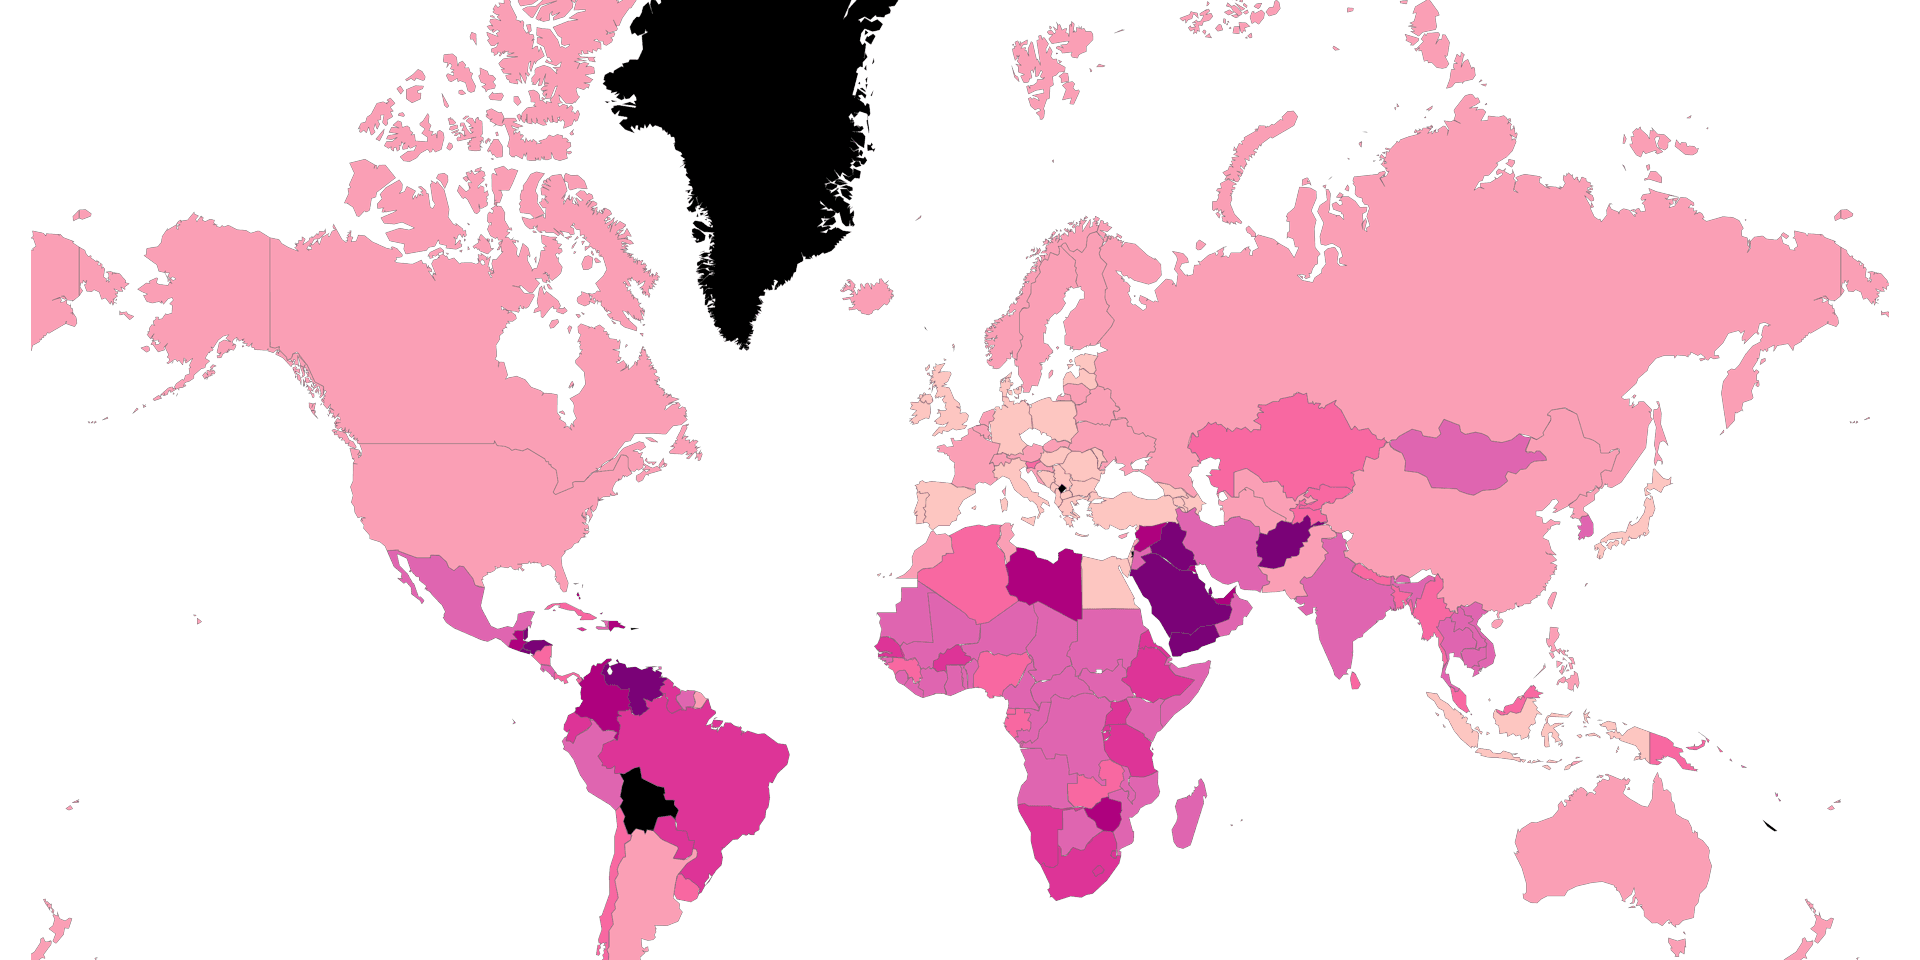 Percentage of deaths caused by injury by country